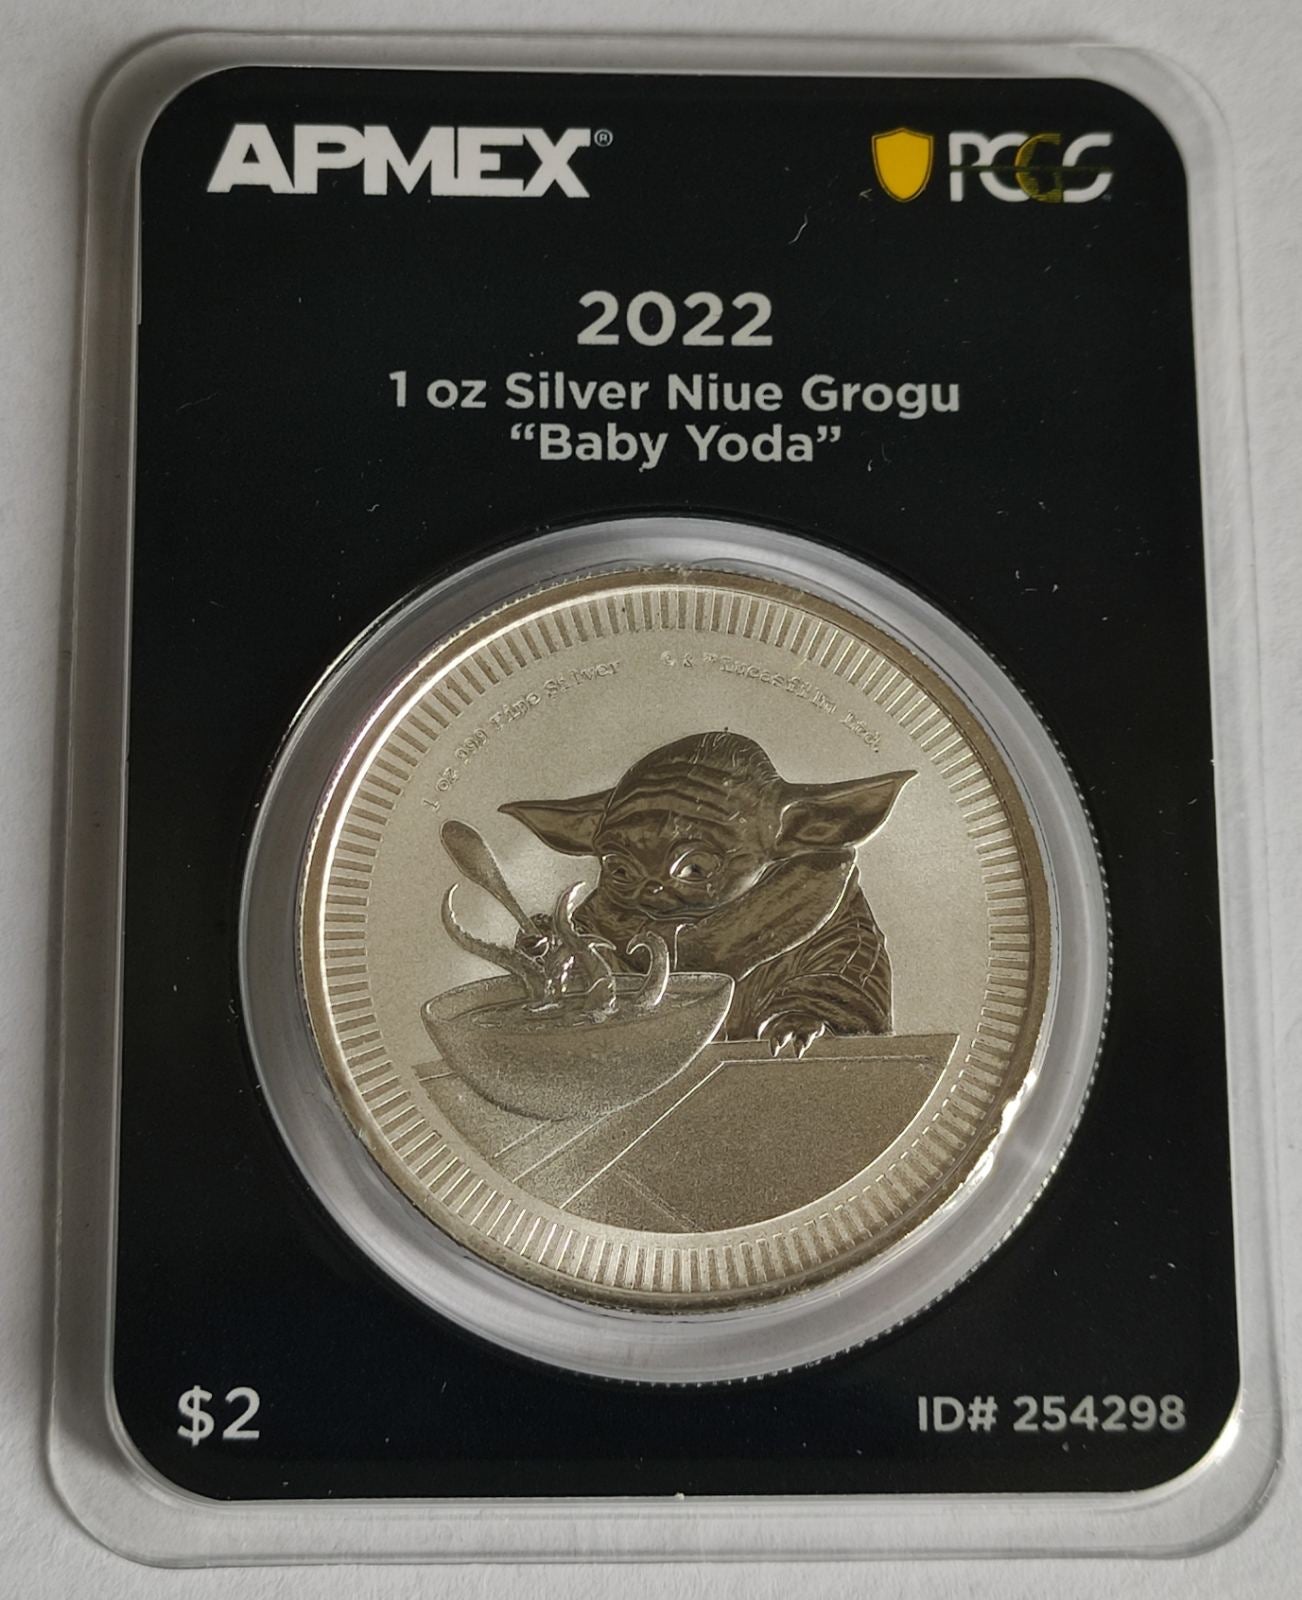 2022 Niue Grogu "Baby Yoda" 1 oz Silver Coin in MintDirect Premier Packaging + PCGS FirstStrike Eligible